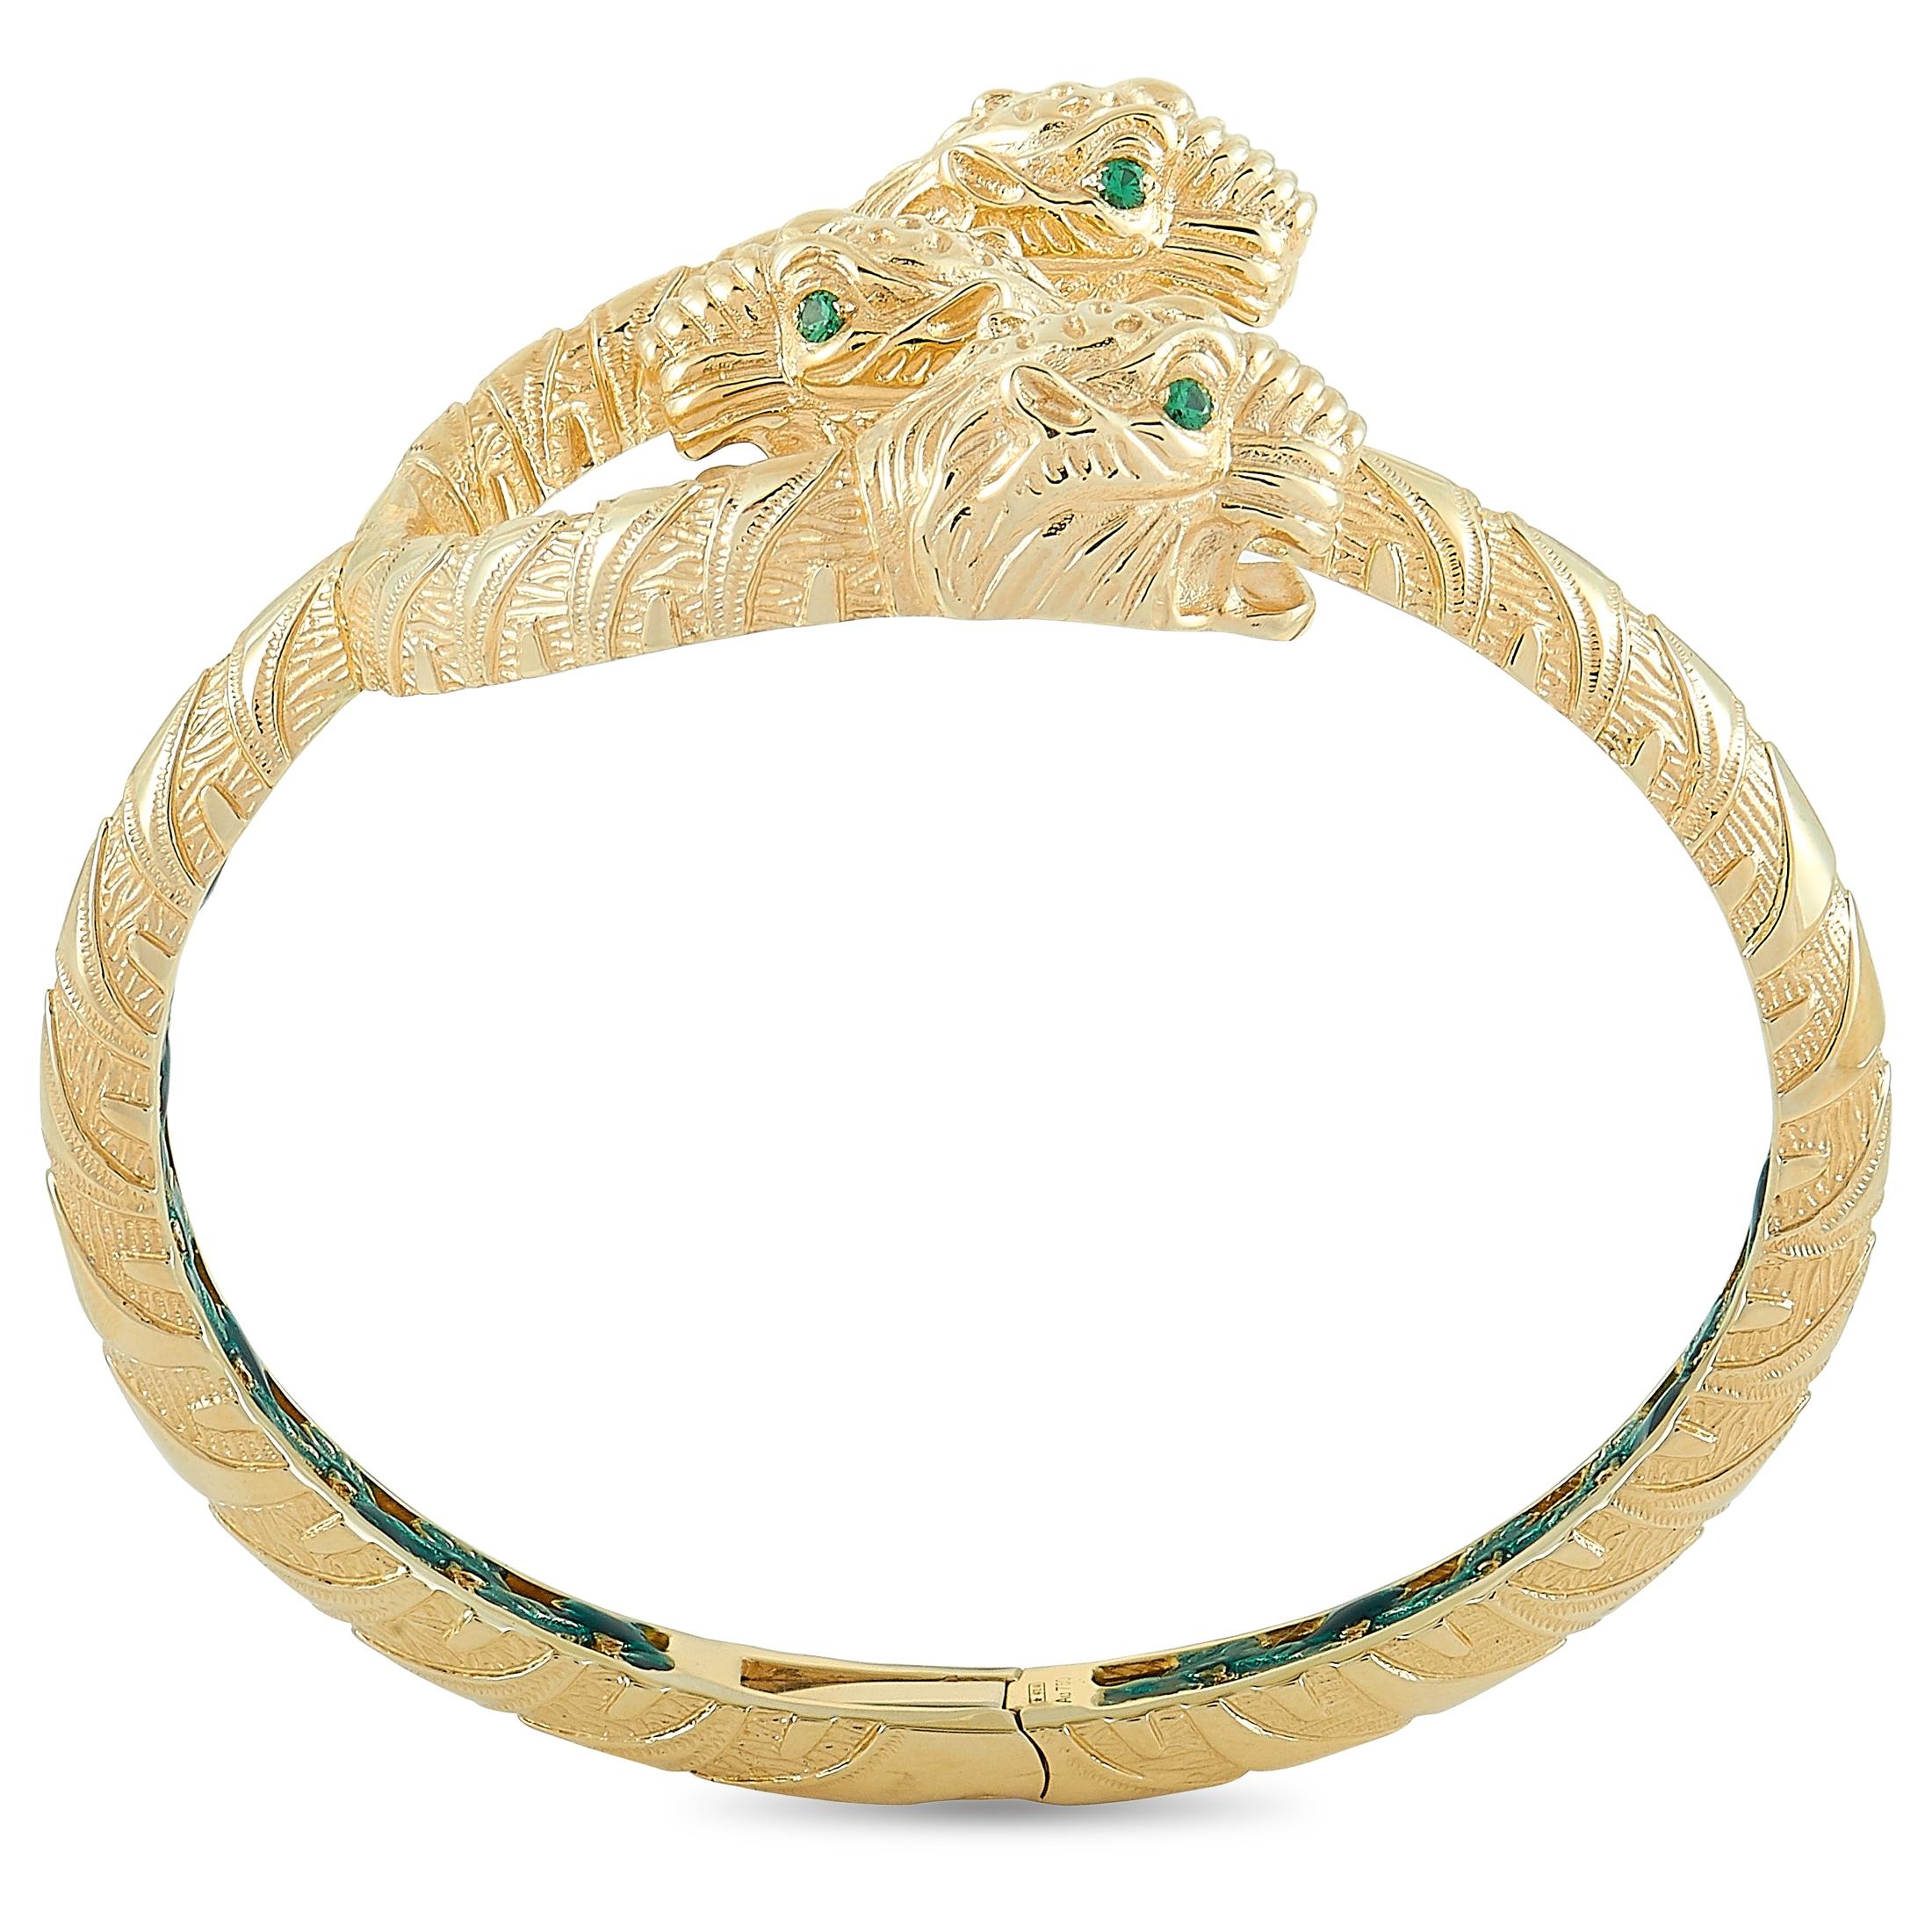 The Gucci “Dionysus” bracelet is made out of 18K yellow gold and tsavorites and weighs 56 grams, measuring 7” in length.
 
 The bracelet is offered in brand new condition and includes the manufacturer’s box and papers.